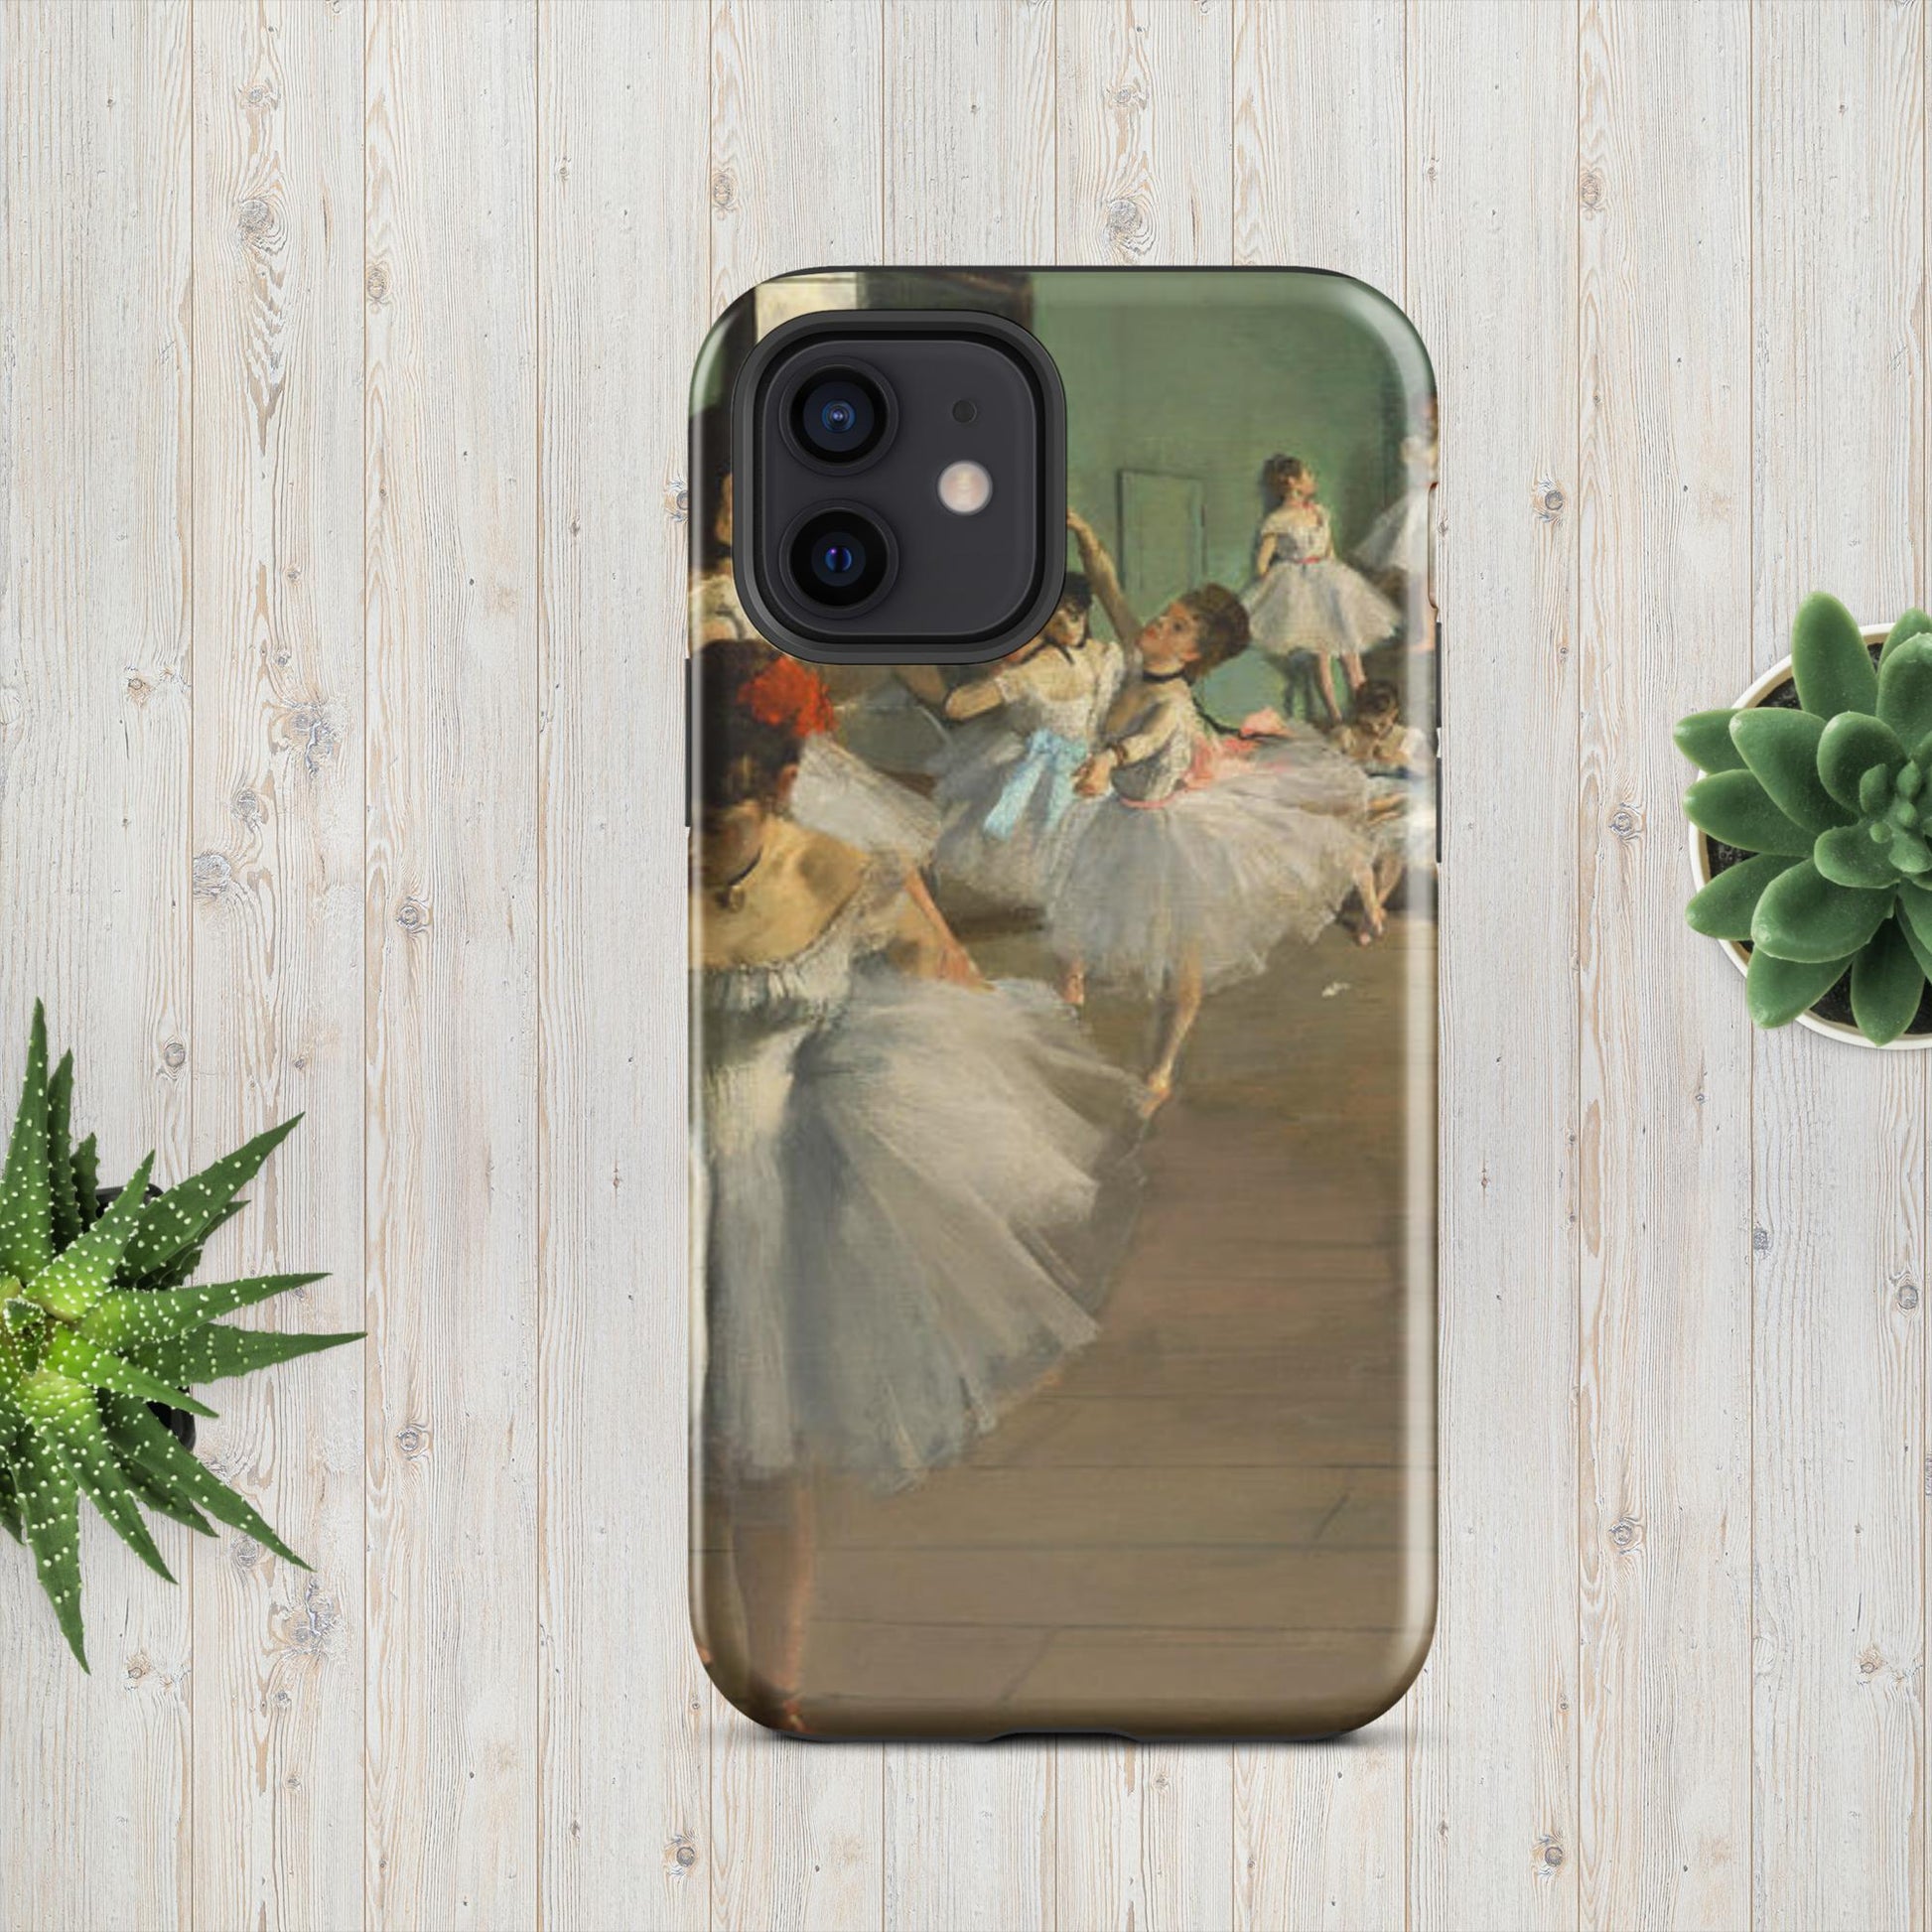 The Hologram Hook Up Glossy / iPhone 12 Edgar's Dance Tough Case for iPhone®